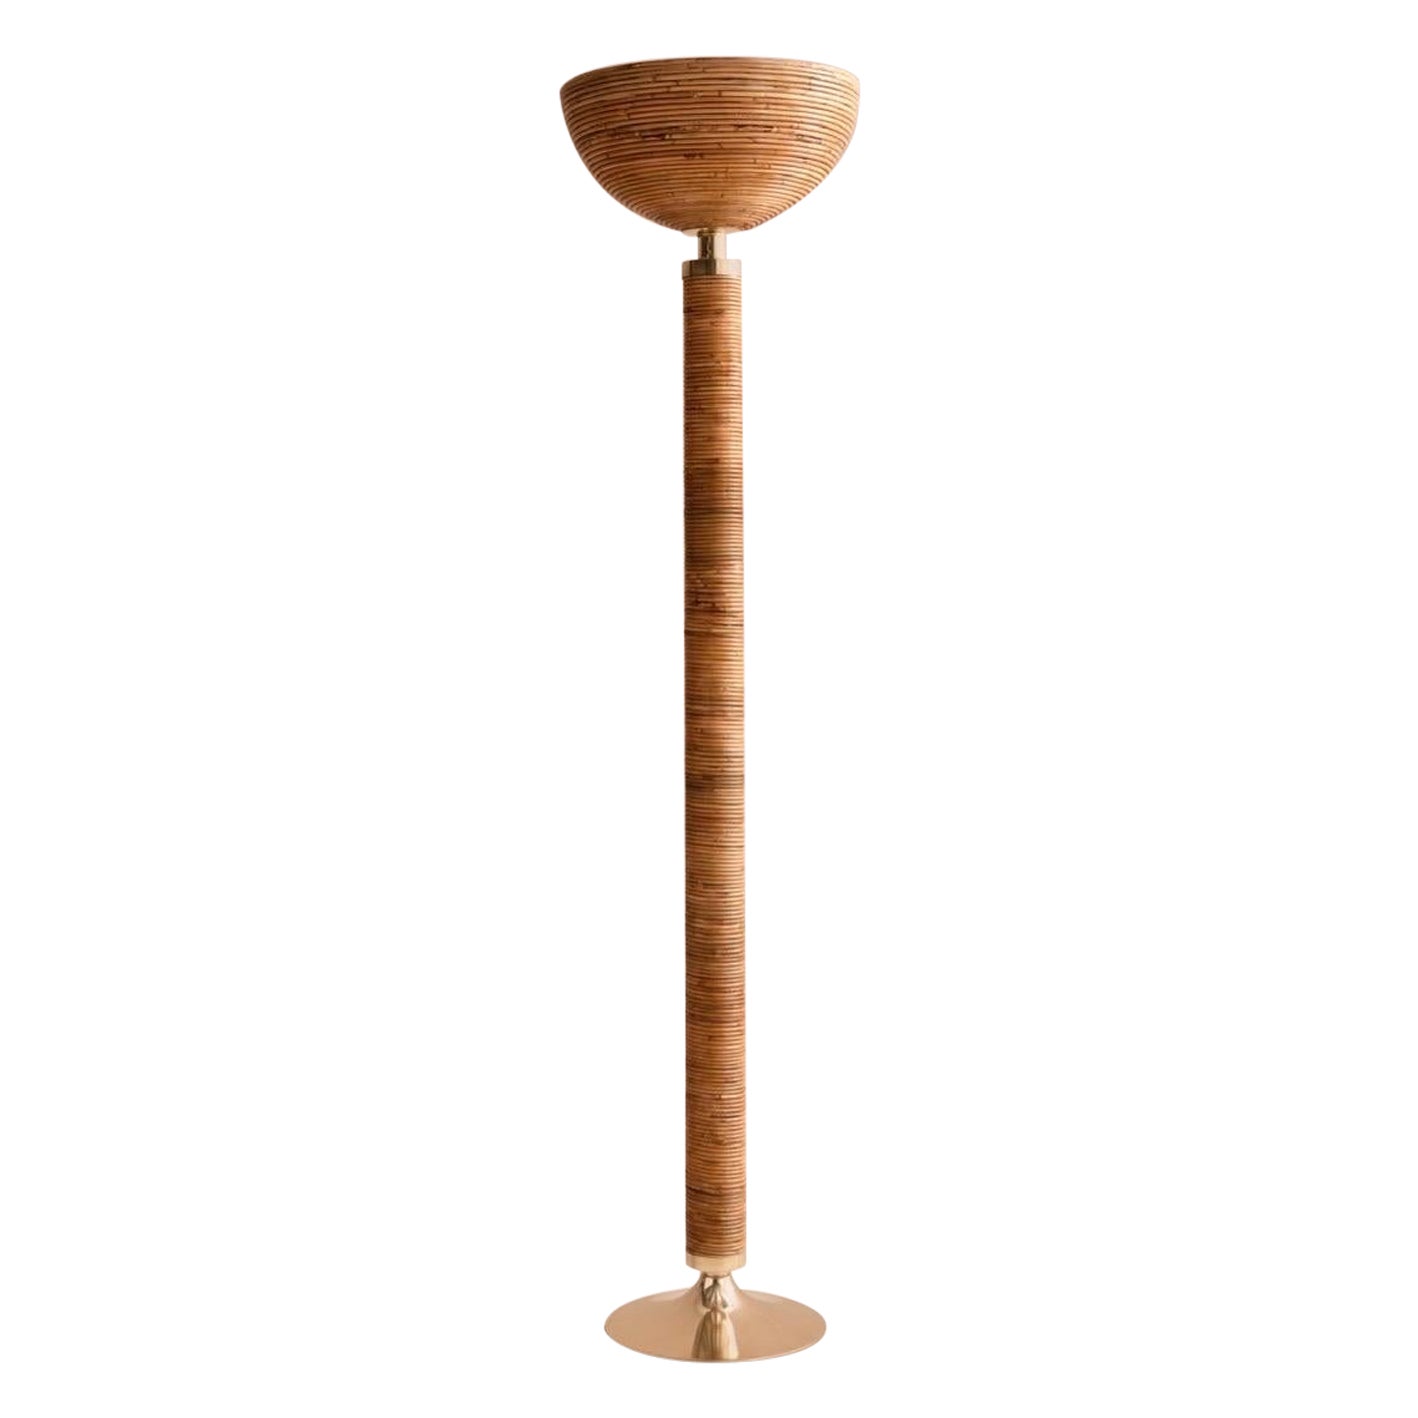 Italian bamboo and brass floor lamp Gabriella Crespi Style  For Sale